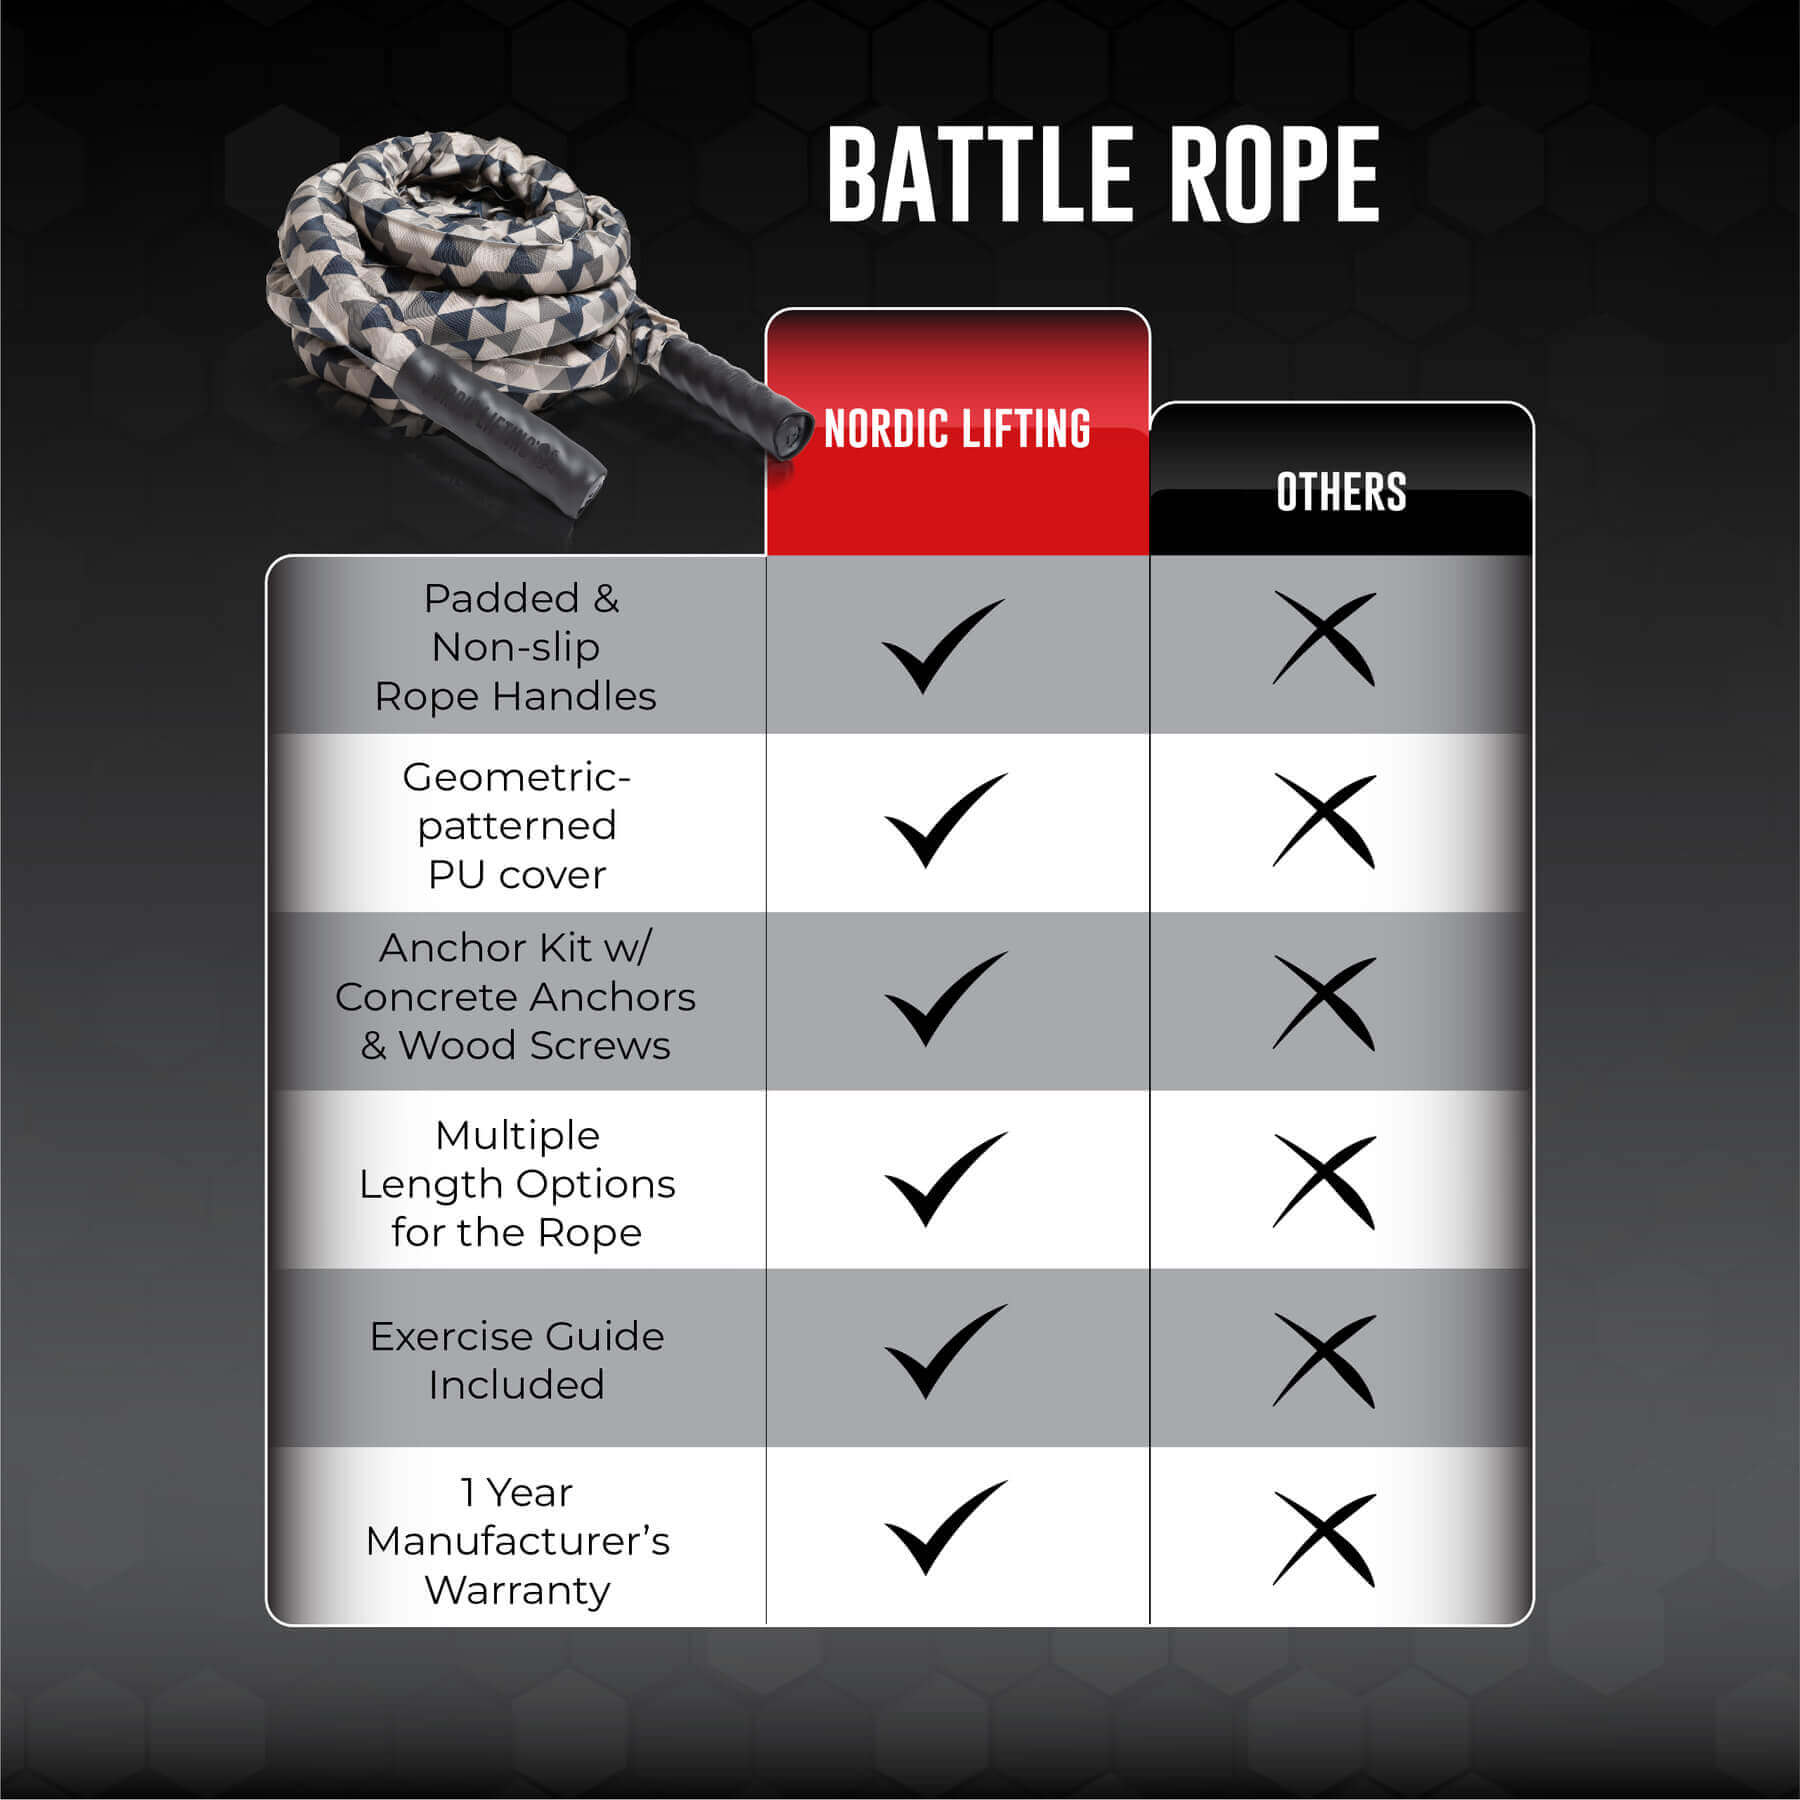 The Best Battle Rope For Daily Cardio and Strength Training – Nordic Lifting